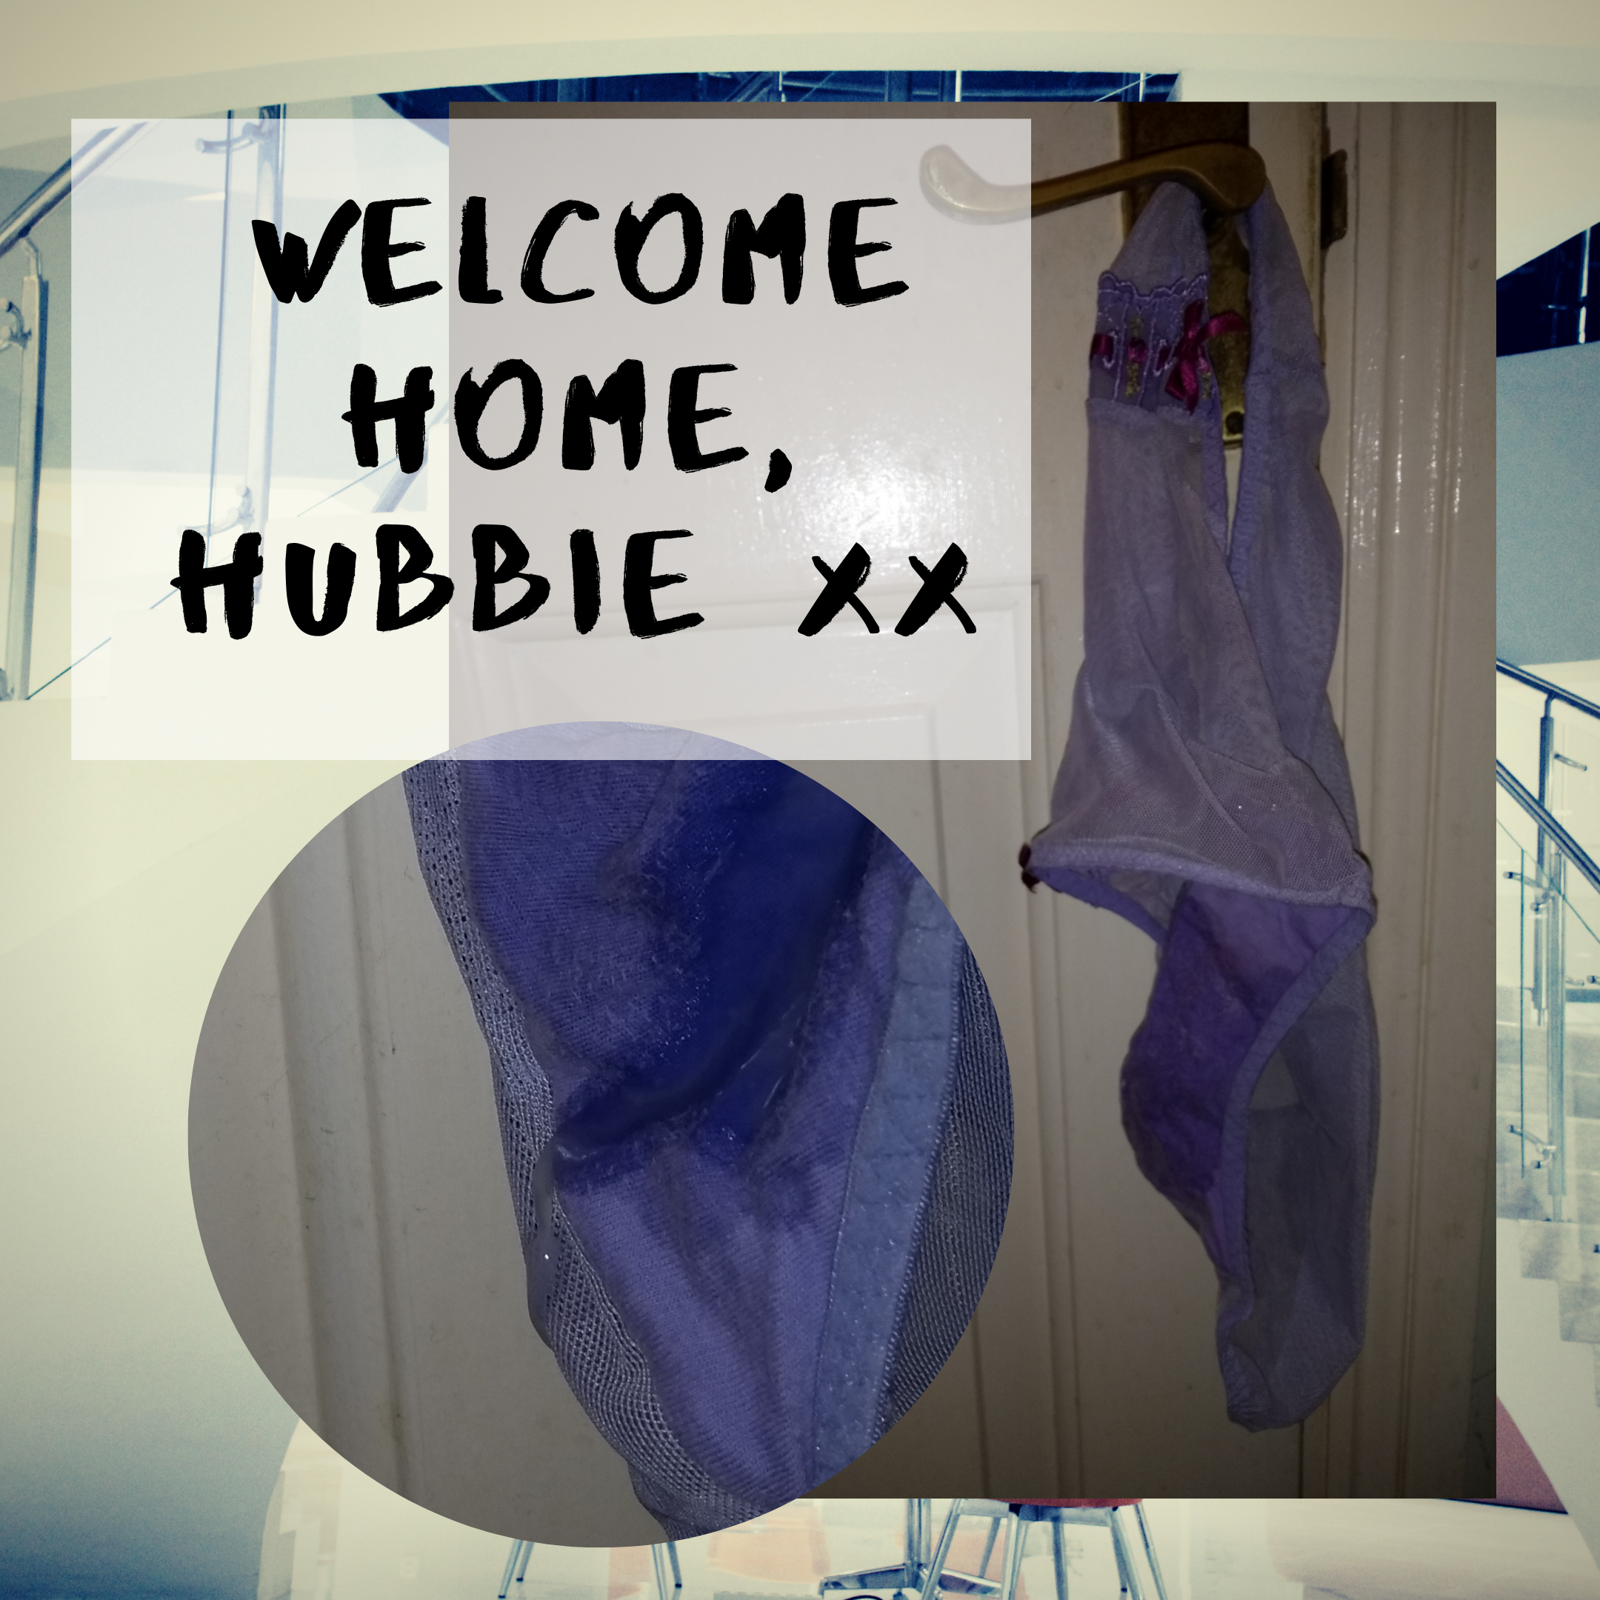 Photo by Hotwife Hubbie with the username @Hubb1e,  November 3, 2019 at 5:48 PM and the text says 'After a few days away on a business trip, I came home late in the evening to find this hanging on the bedroom door. What a welcome home..'